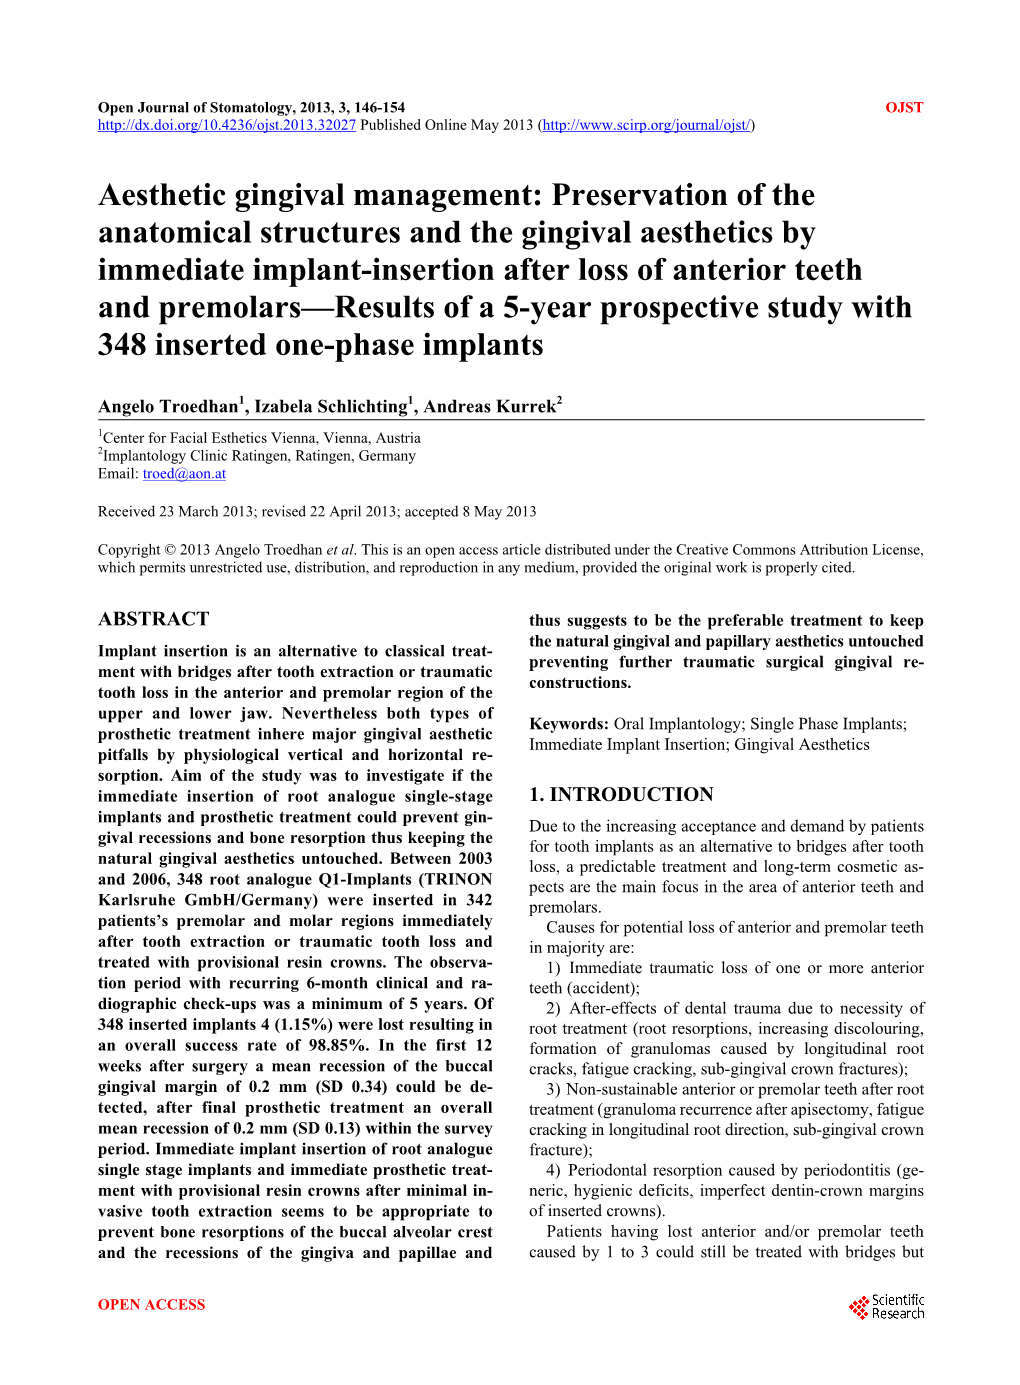 Preservation of the Anatomical Structures and the Gingival Aesthetics by Immediate Implant-Insert